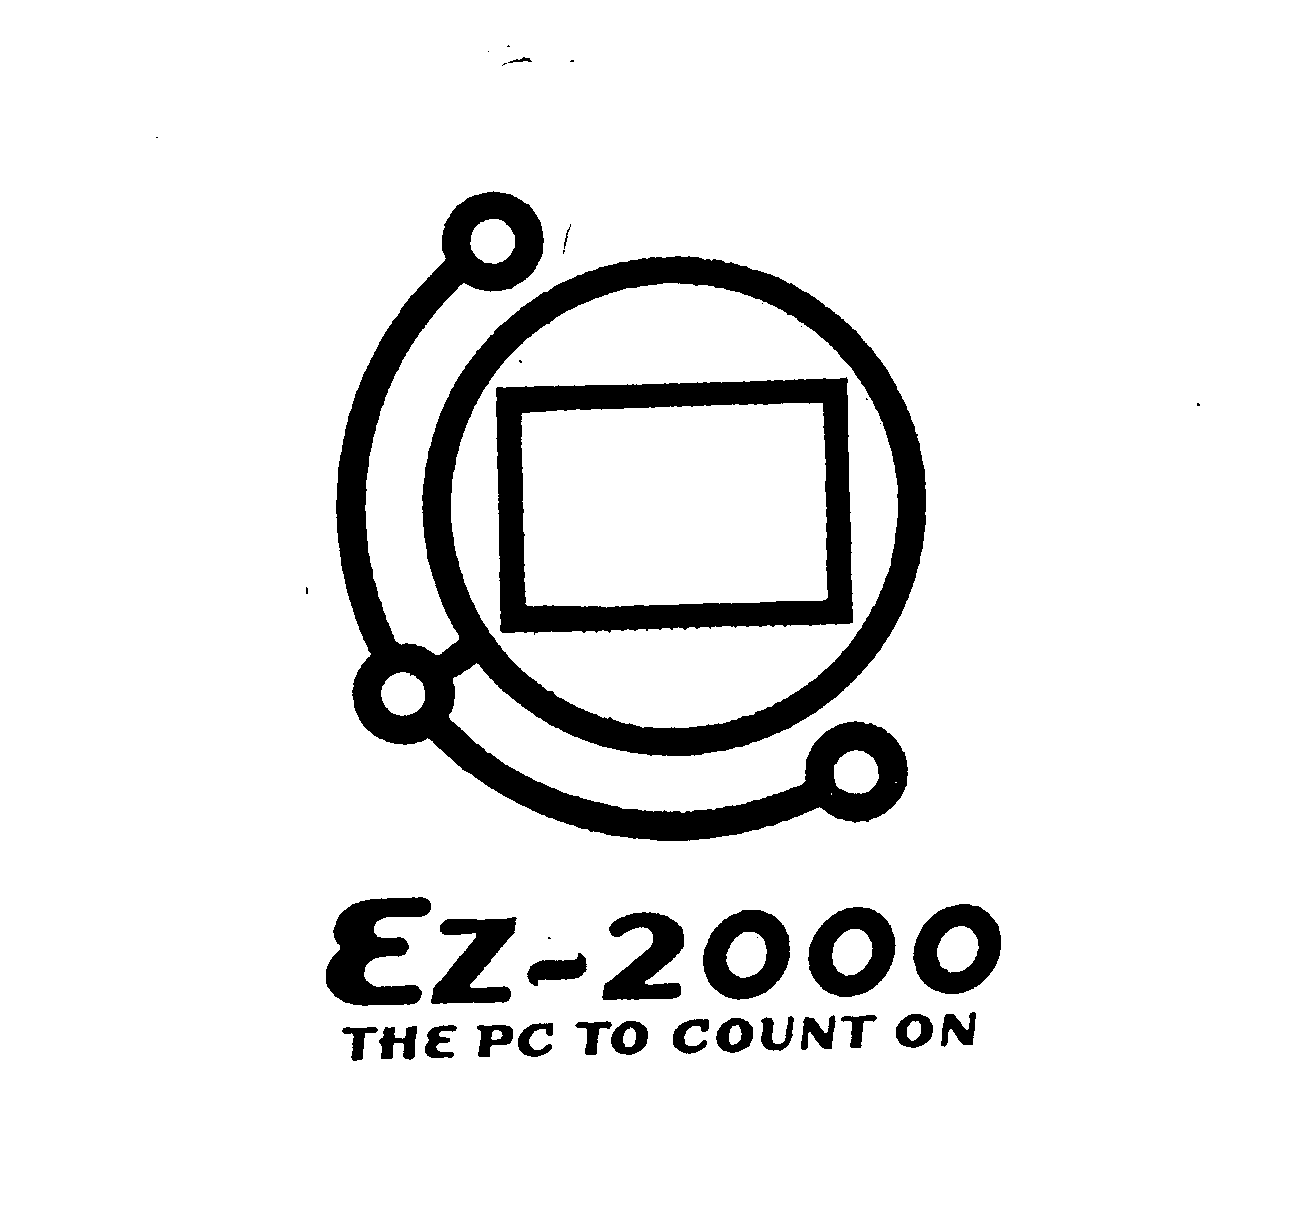  EZ-2000 THE PC TO COUNT ON